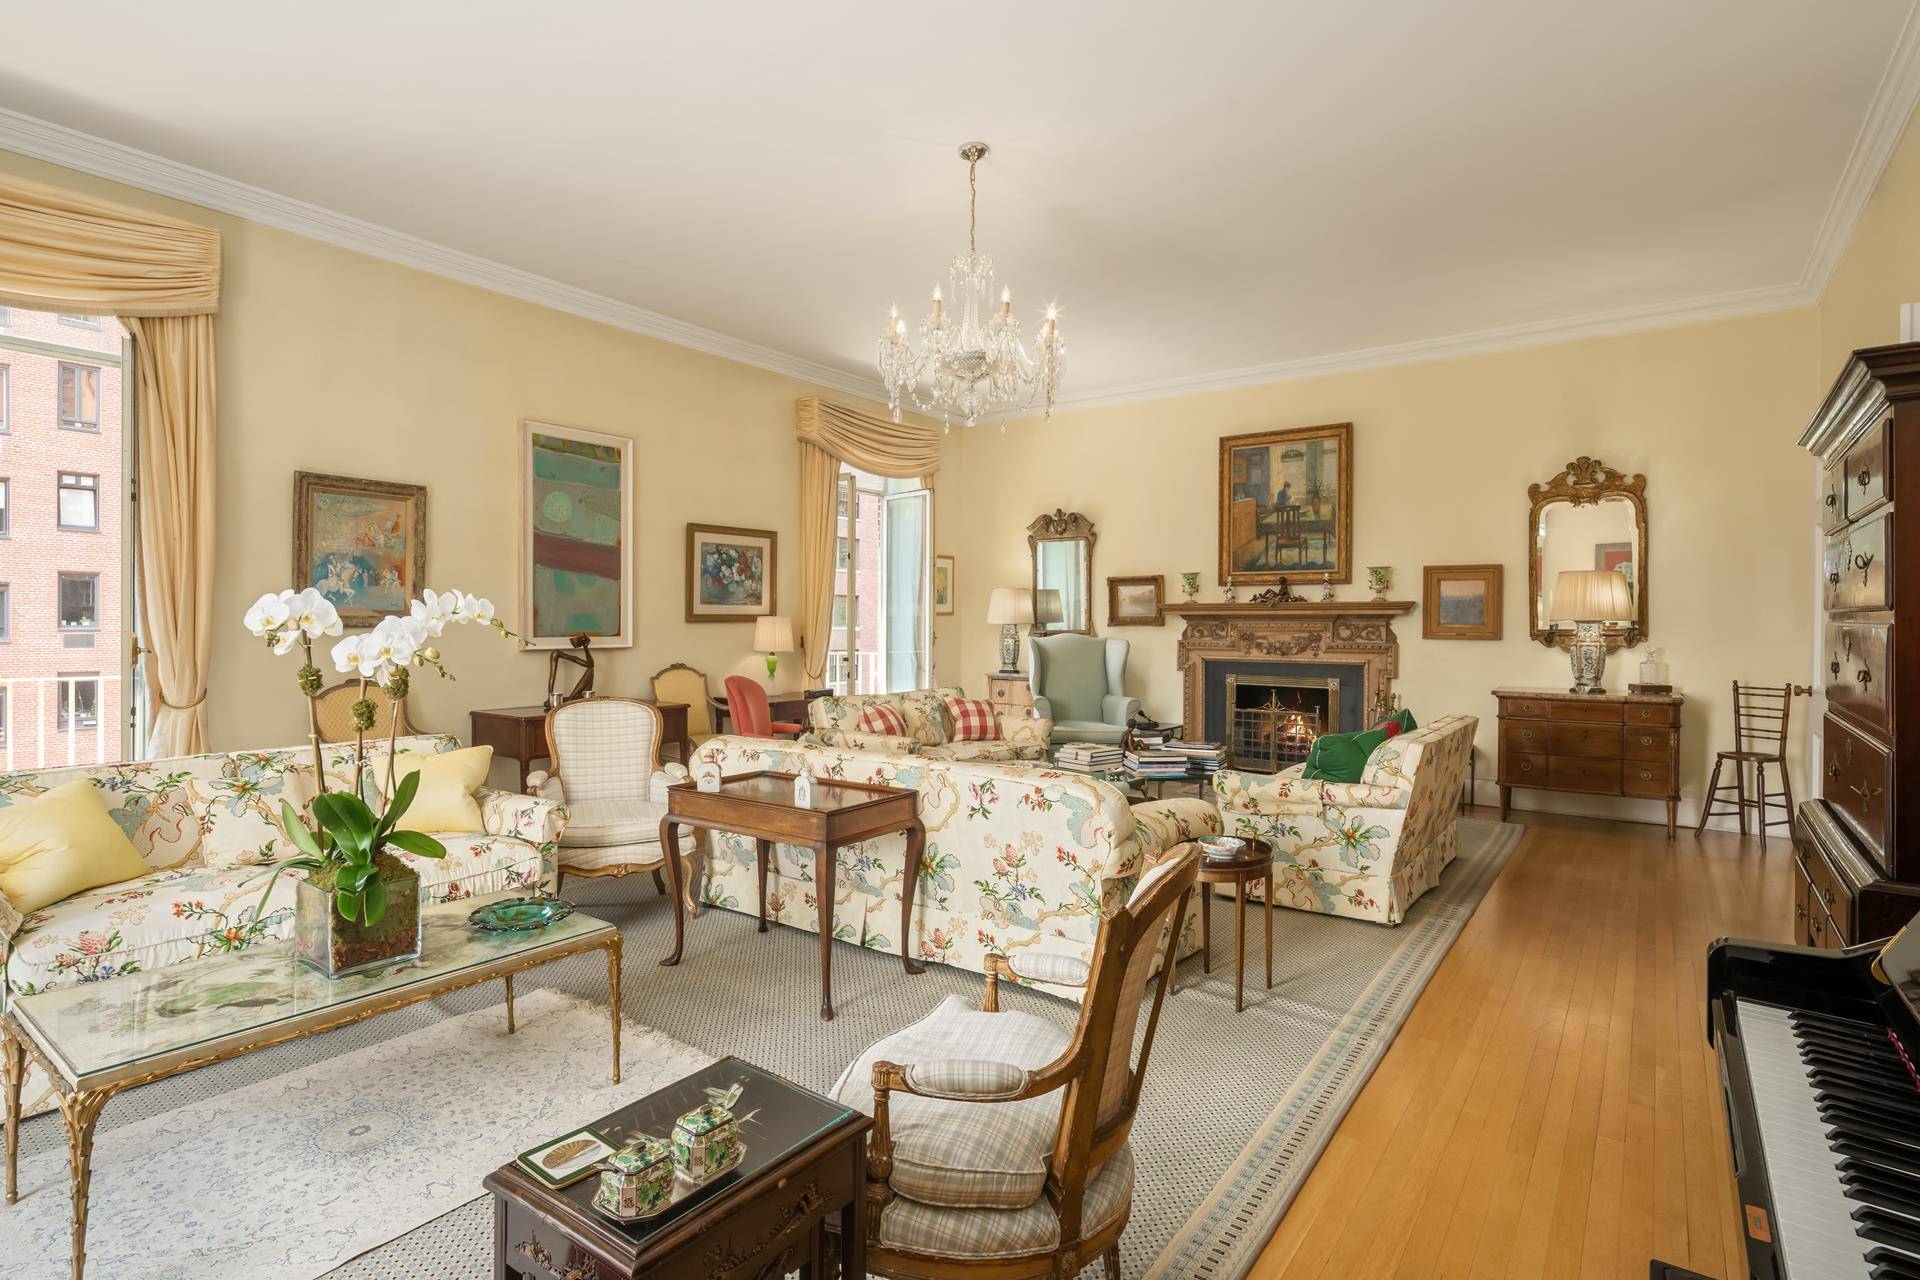 Opportunity to Own Former Kennedy's Apartment The long time home of President John F.